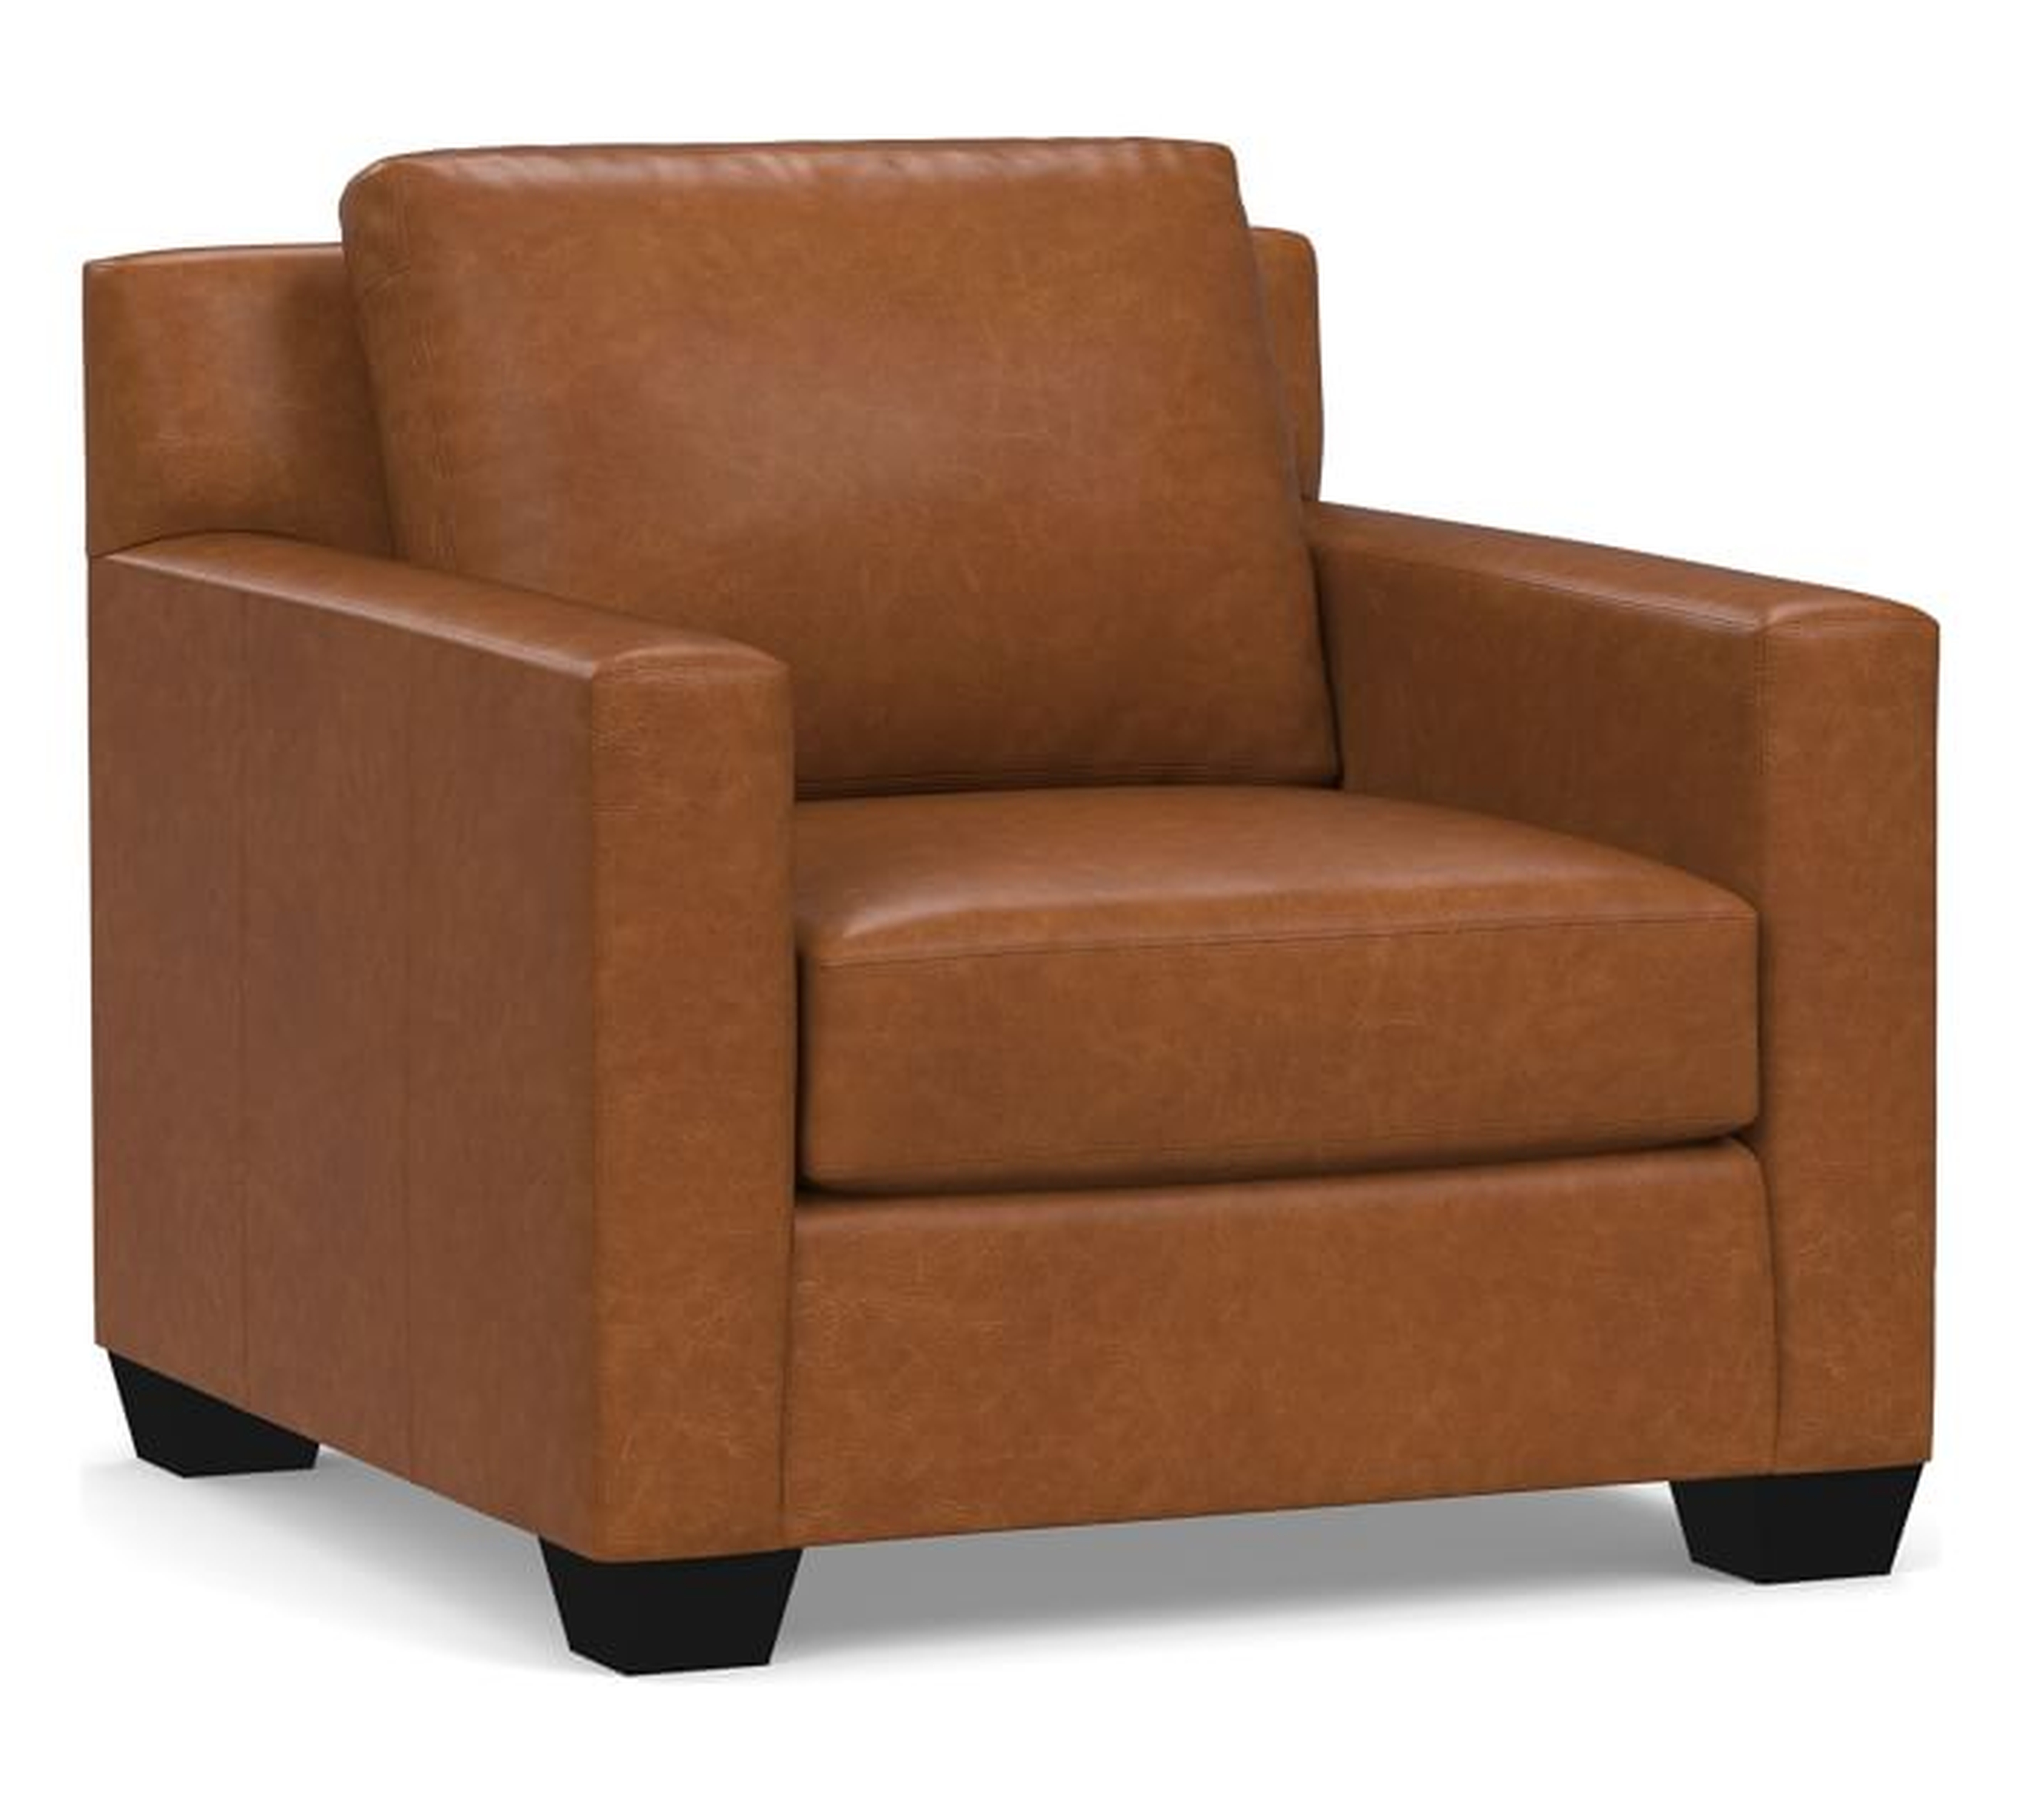 York Square Arm Leather Armchair, Polyester Wrapped Cushions, Statesville Caramel - Pottery Barn